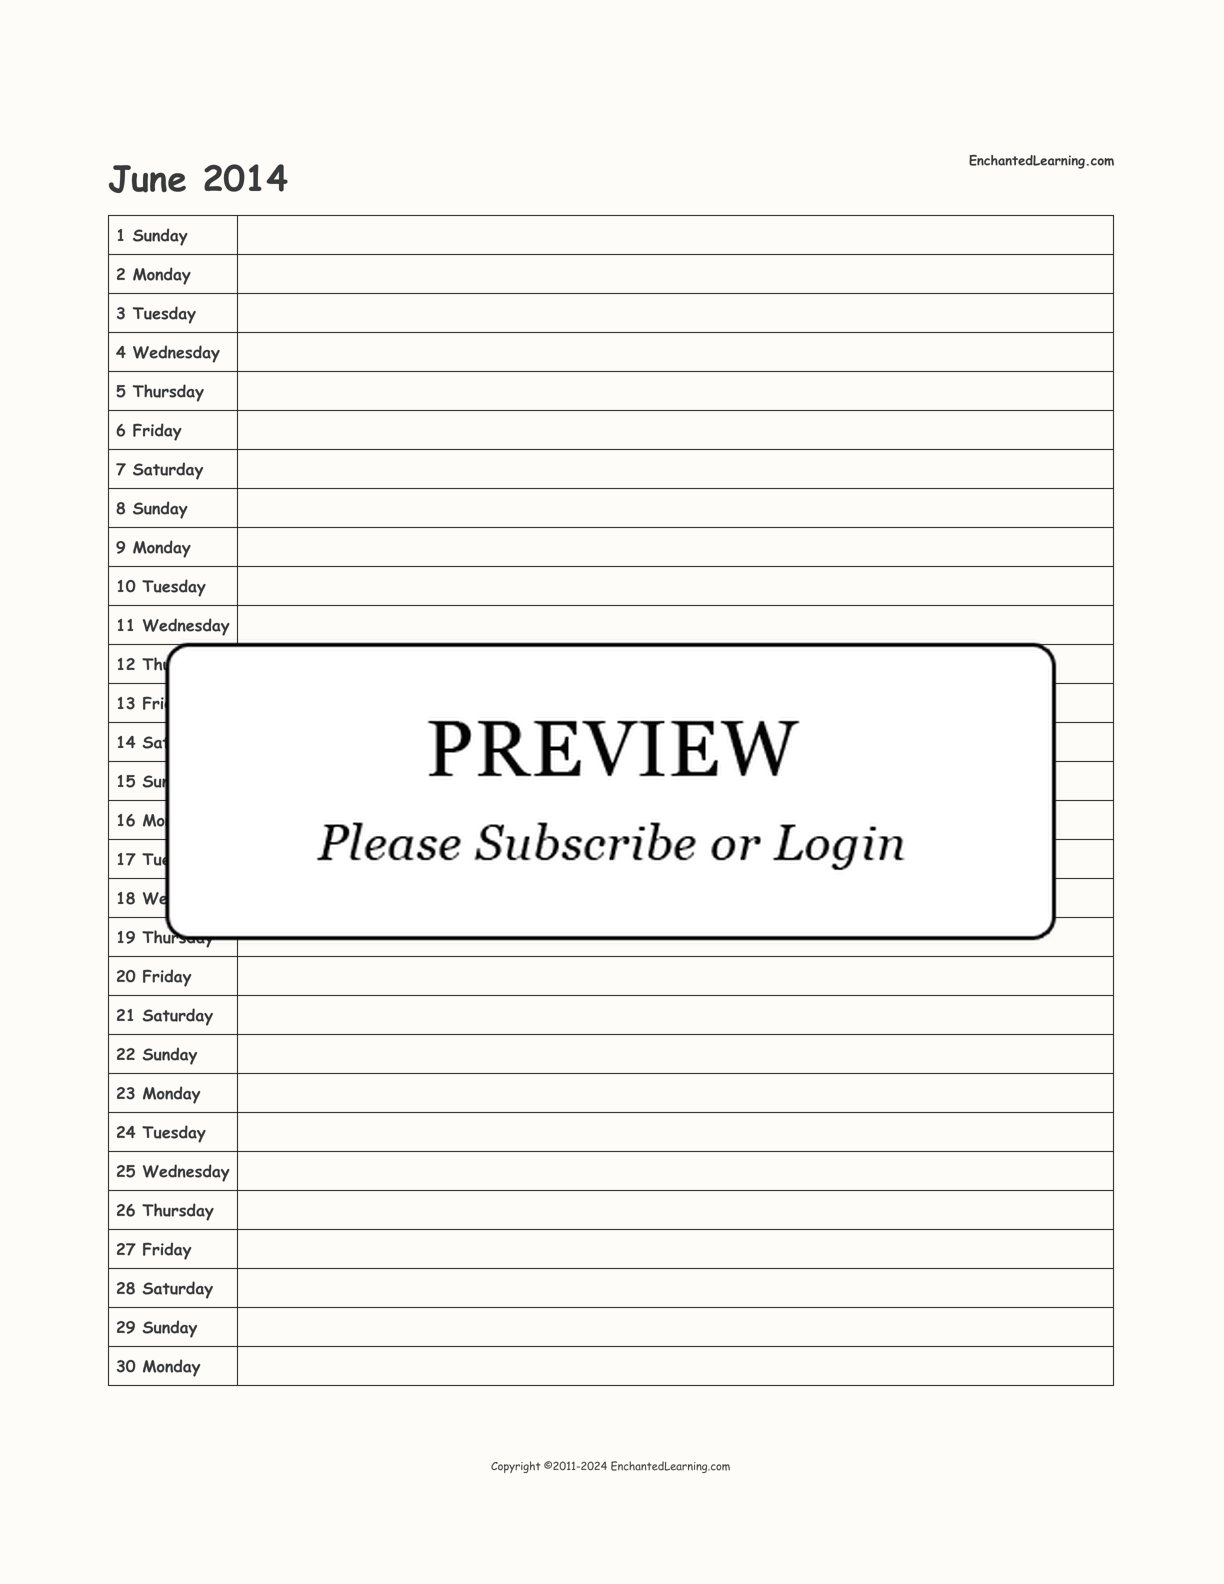 2014 Scheduling Calendar interactive printout page 6